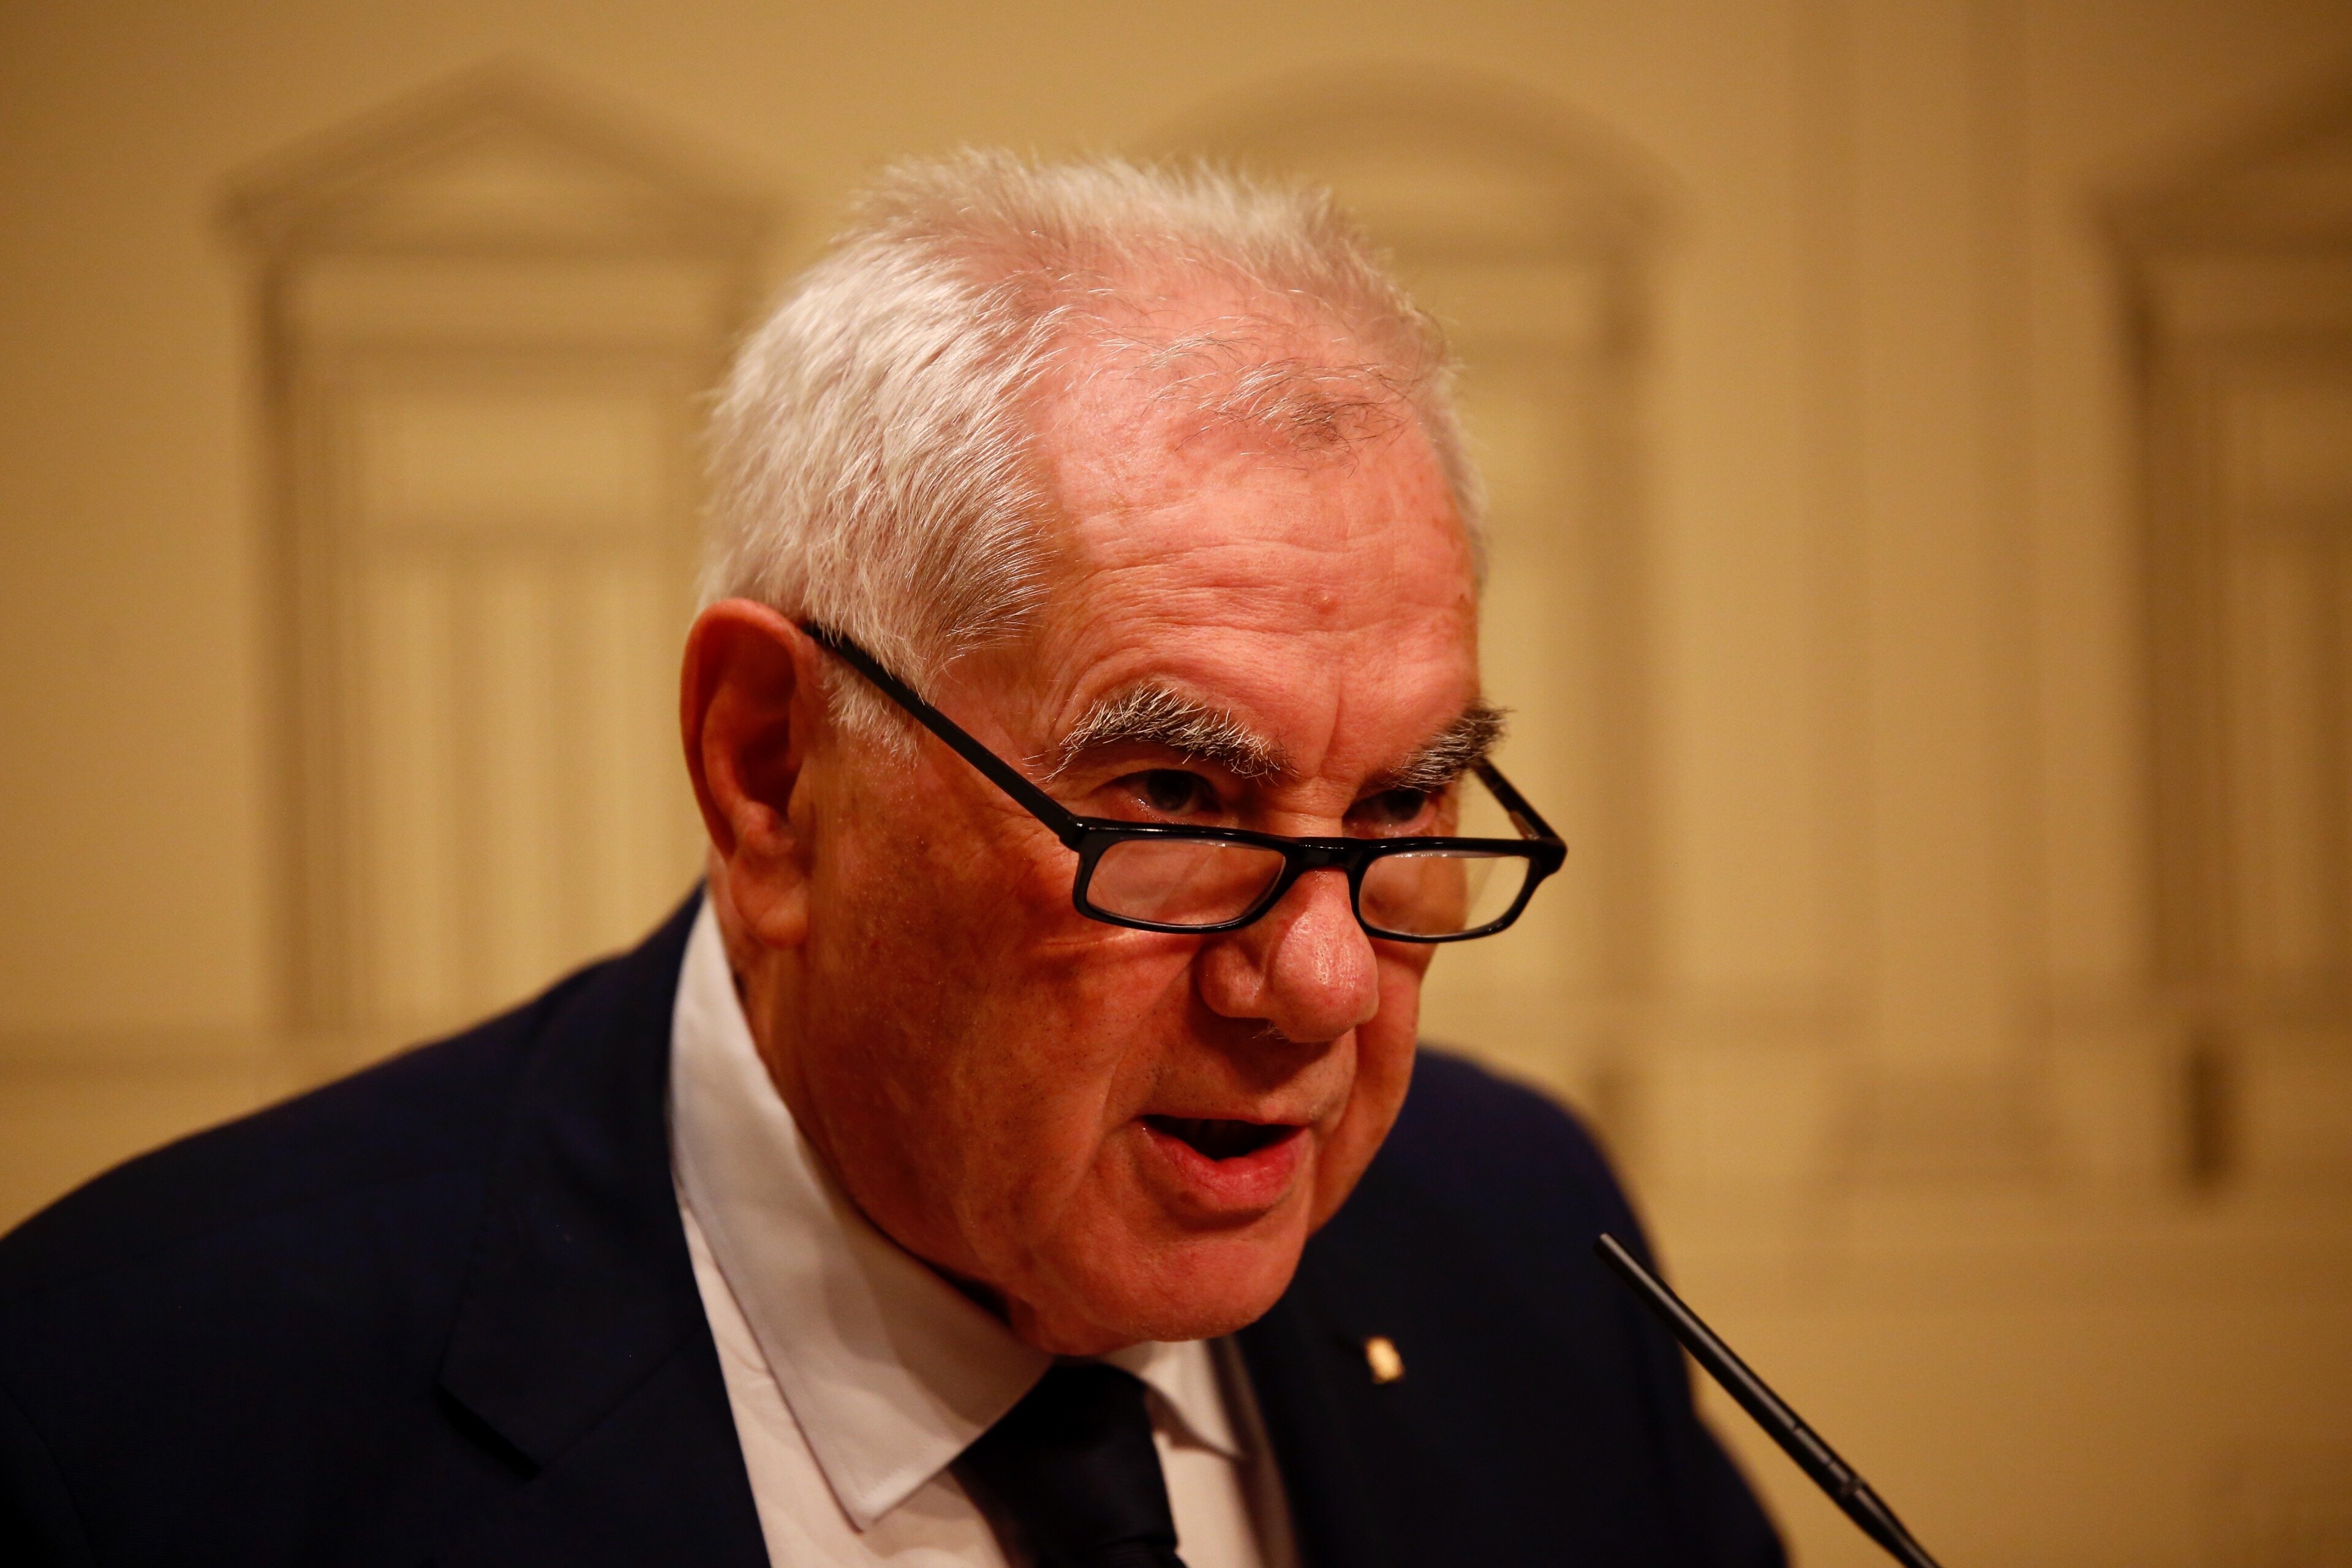 Catalan minister Maragall: Differences between Spain and Catalonia "profound"